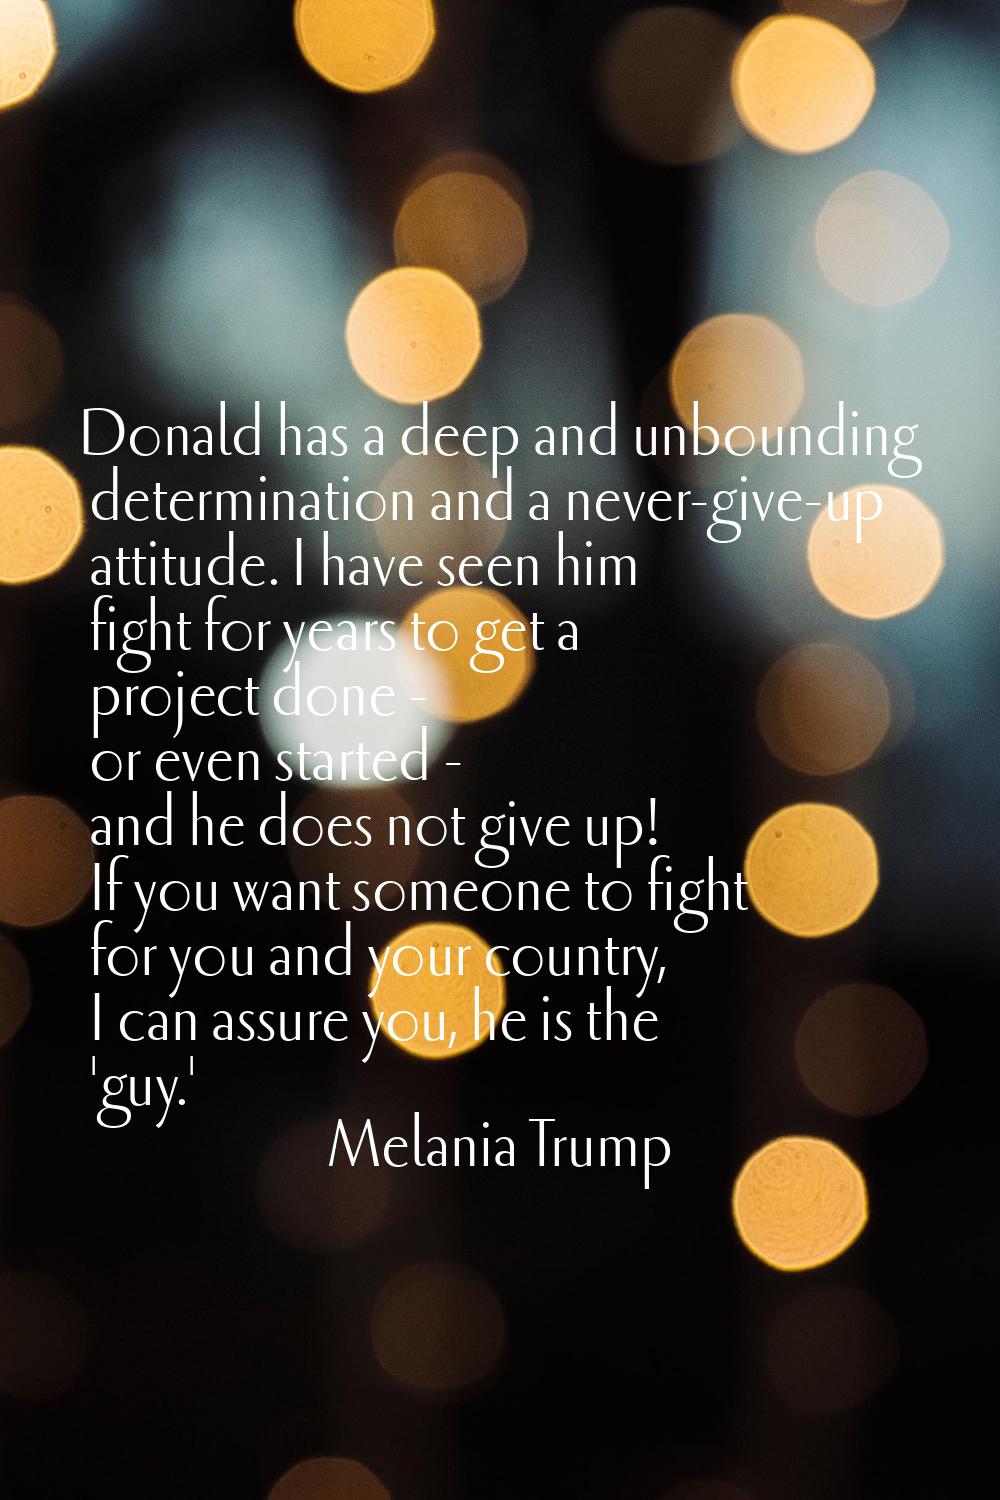 Donald has a deep and unbounding determination and a never-give-up attitude. I have seen him fight 